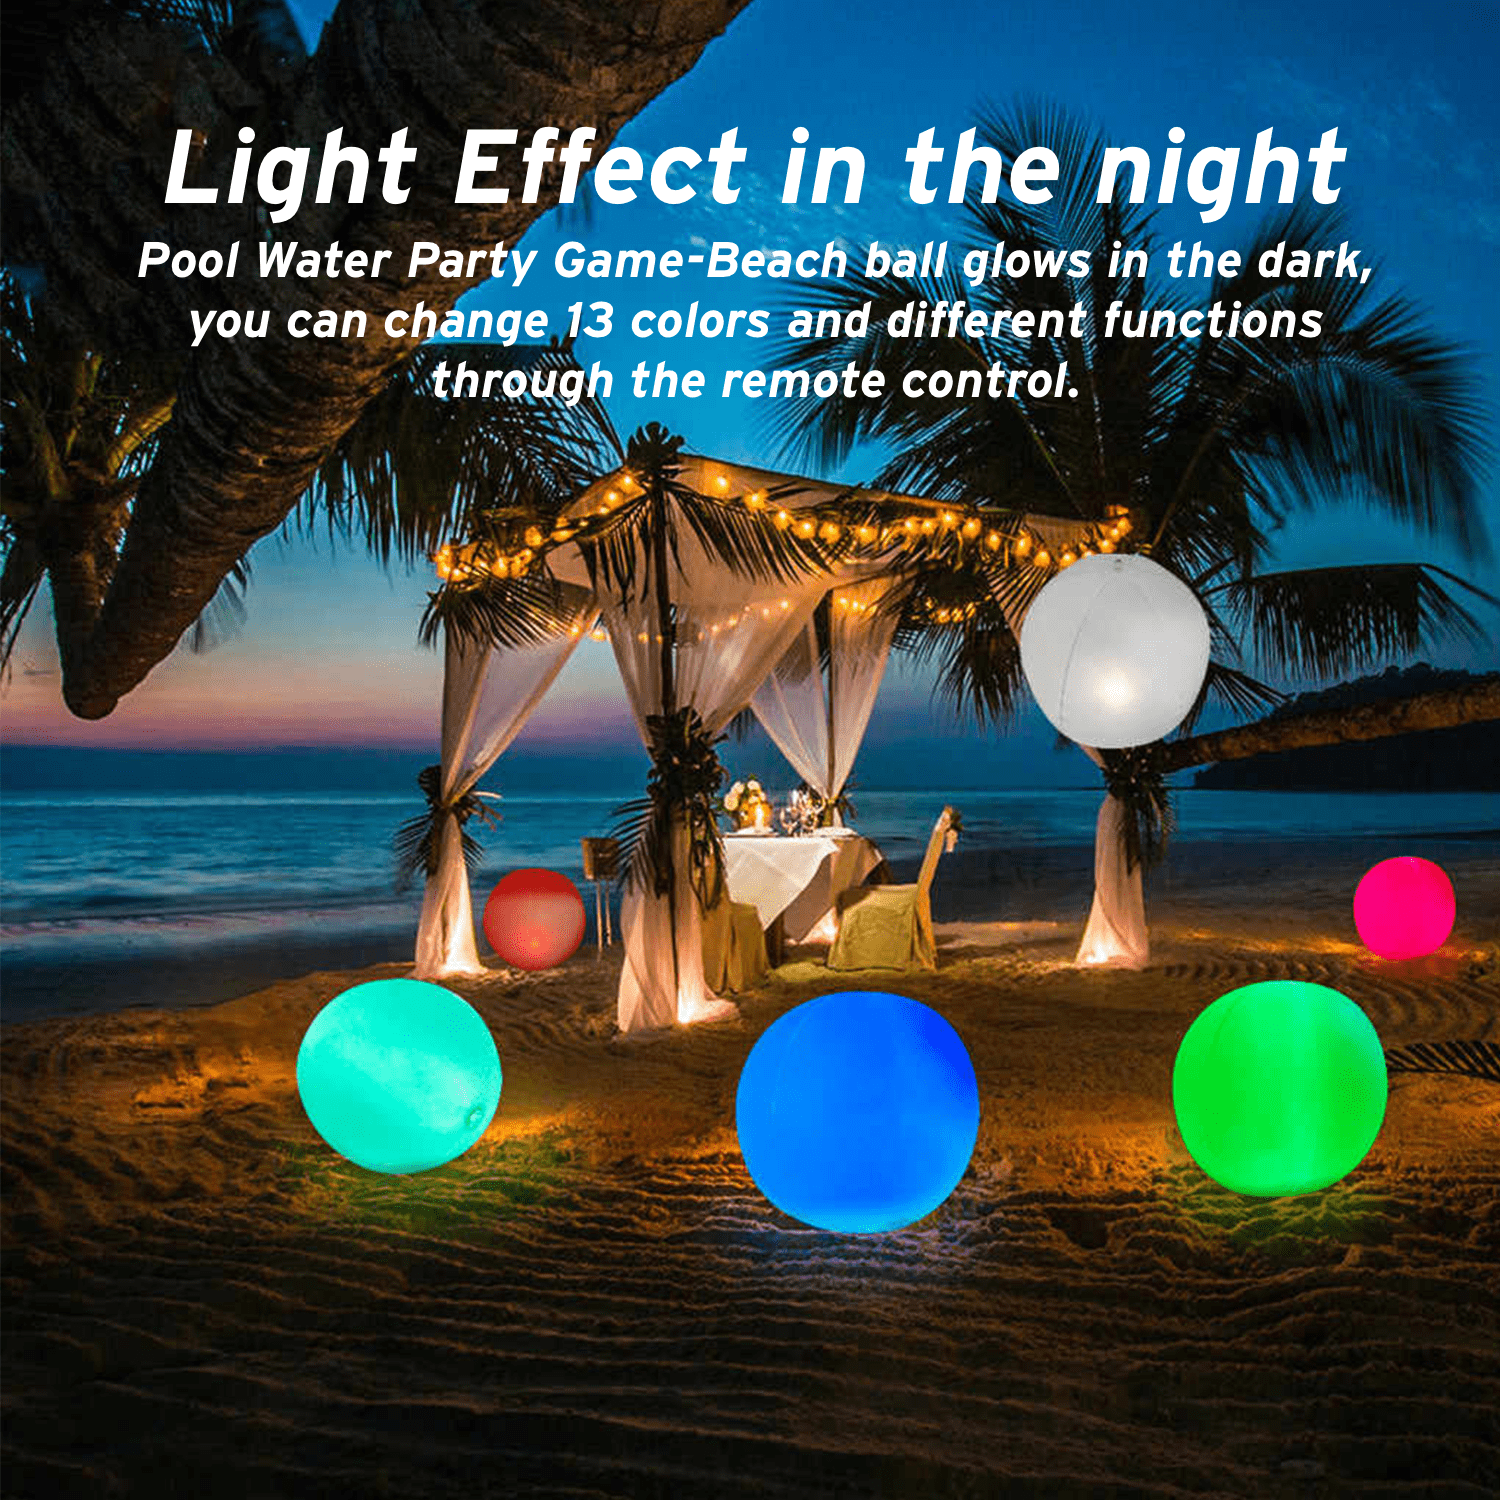 Eyewalk Inflatable Pool Float Toy 16 LED Beach Ball Light Up Volleyball Basketball Soccer for Teens Adults Family 1PC Outdoor Pool Party Beach Yard Lawn Games Decorations 